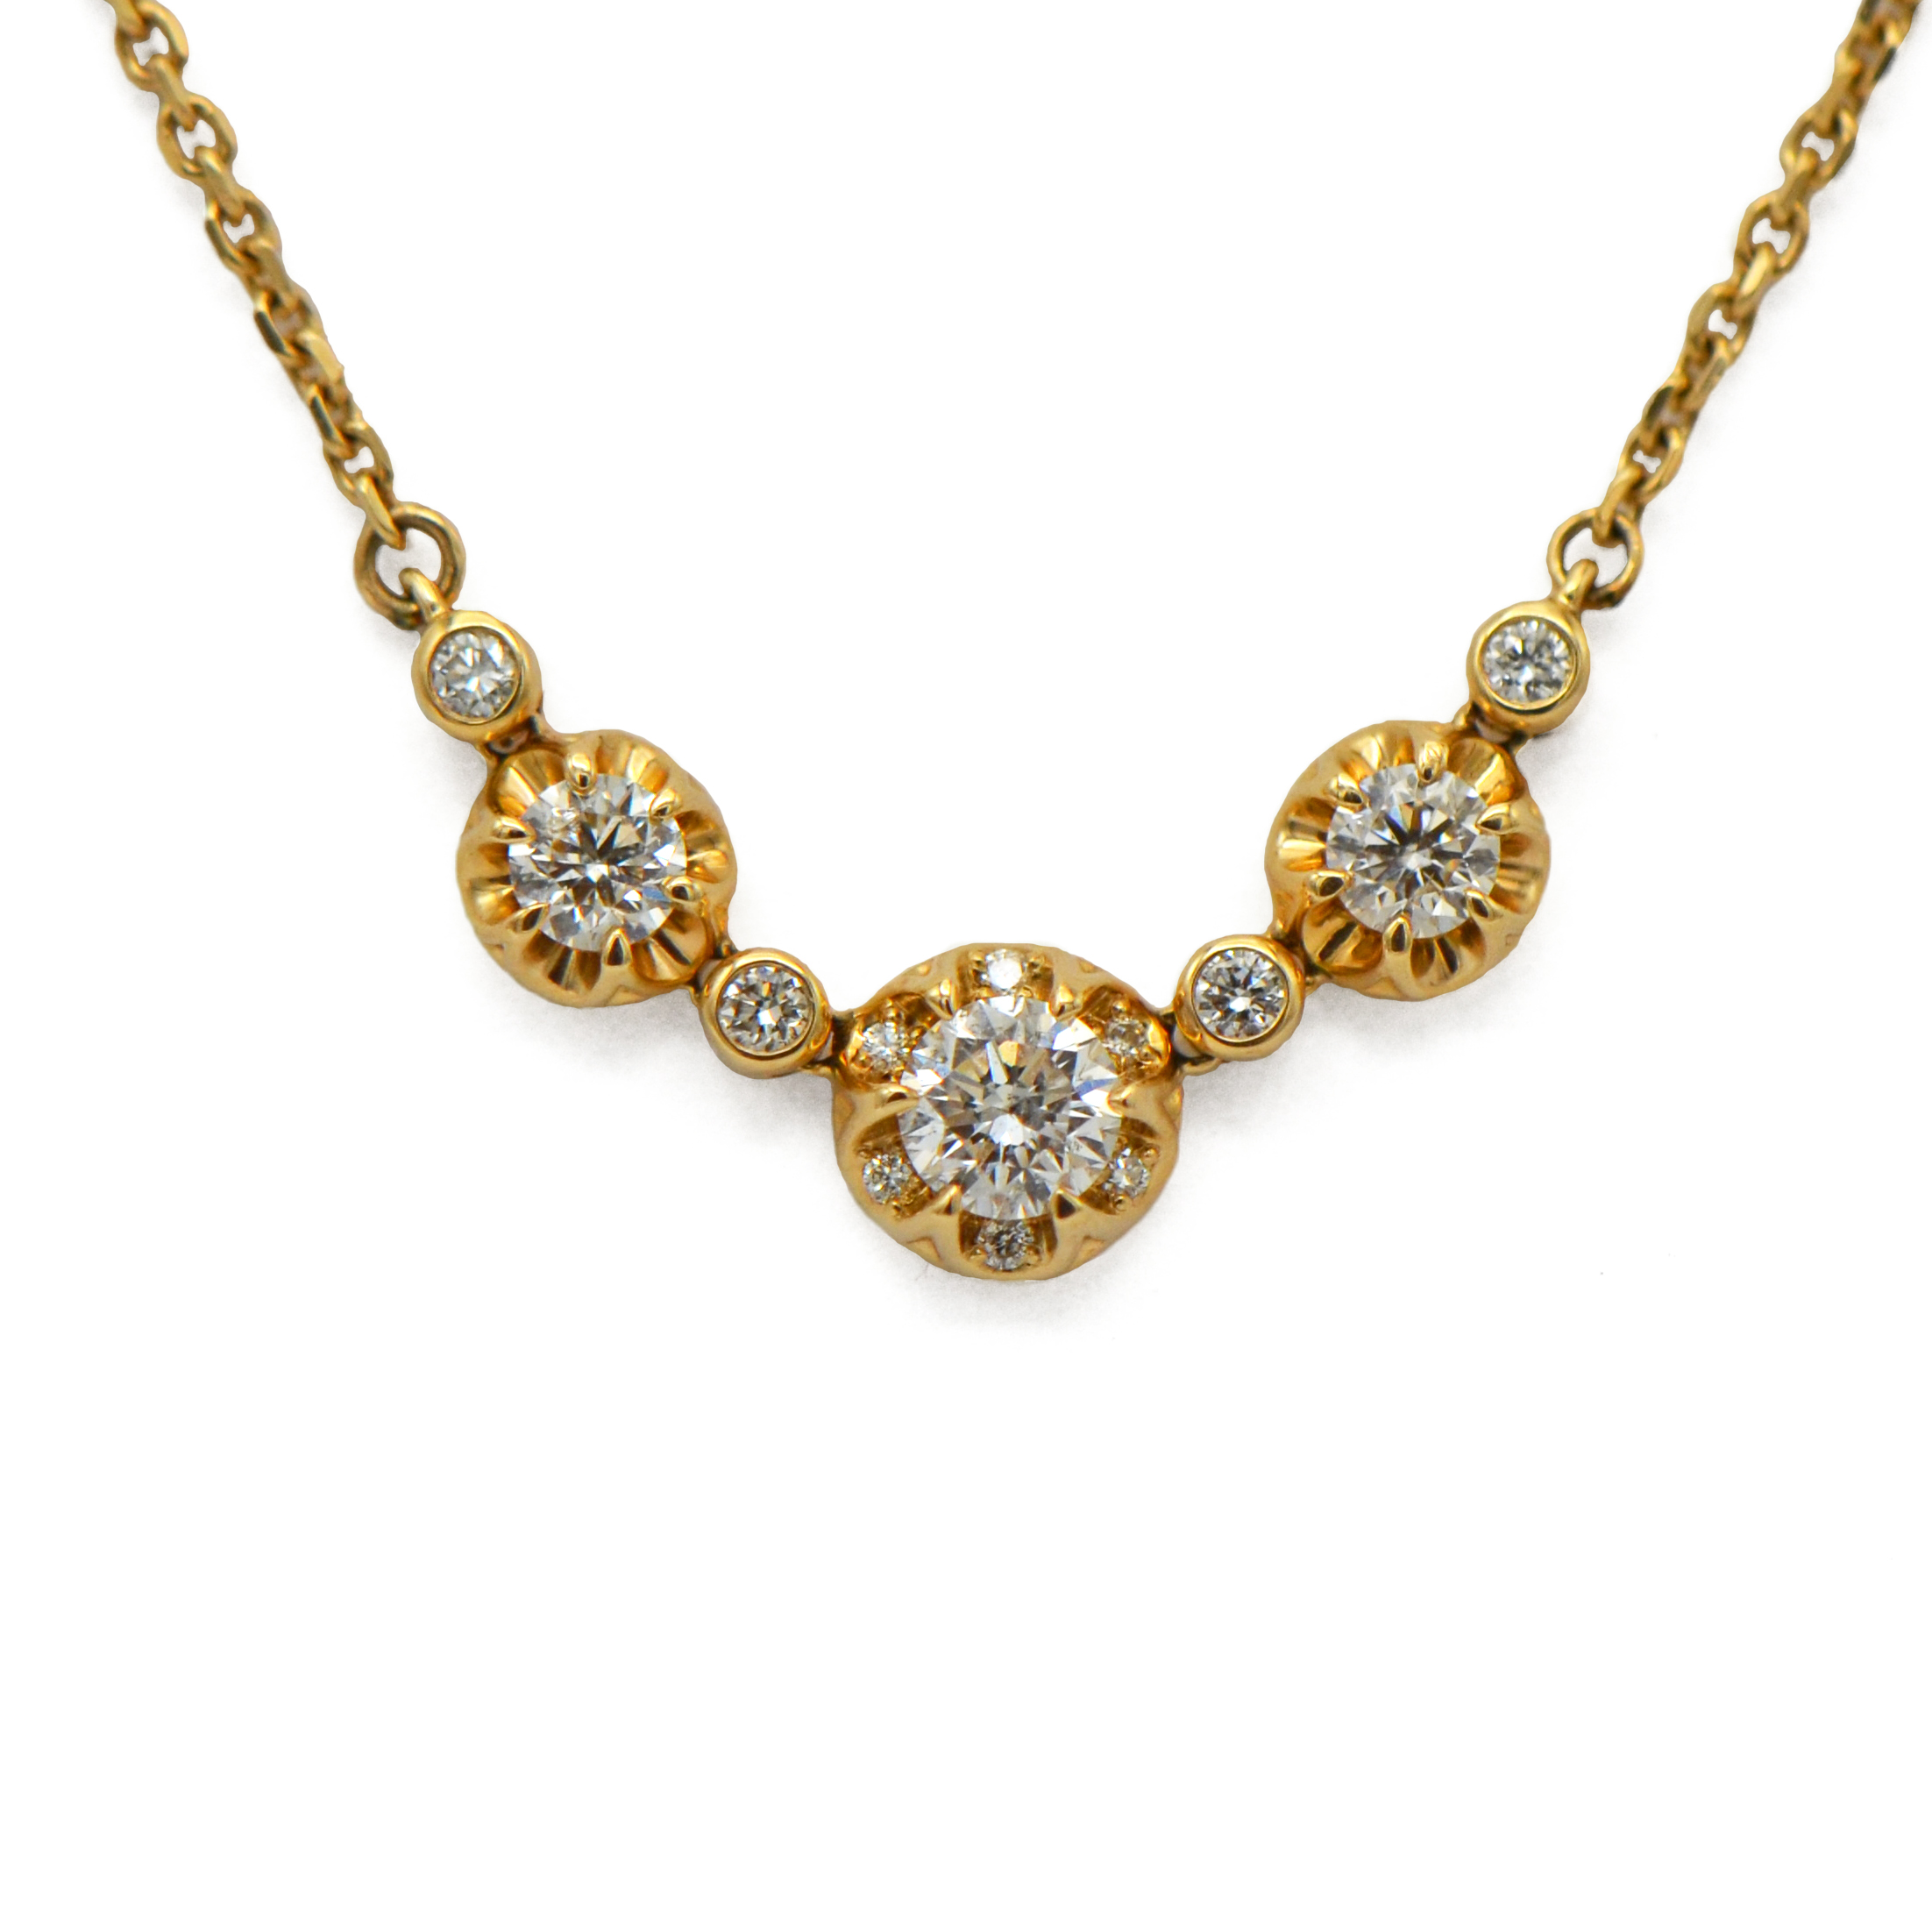 Buy 3 American Diamond Necklace Set (3AUD16) Online at Best Price in India  on Naaptol.com